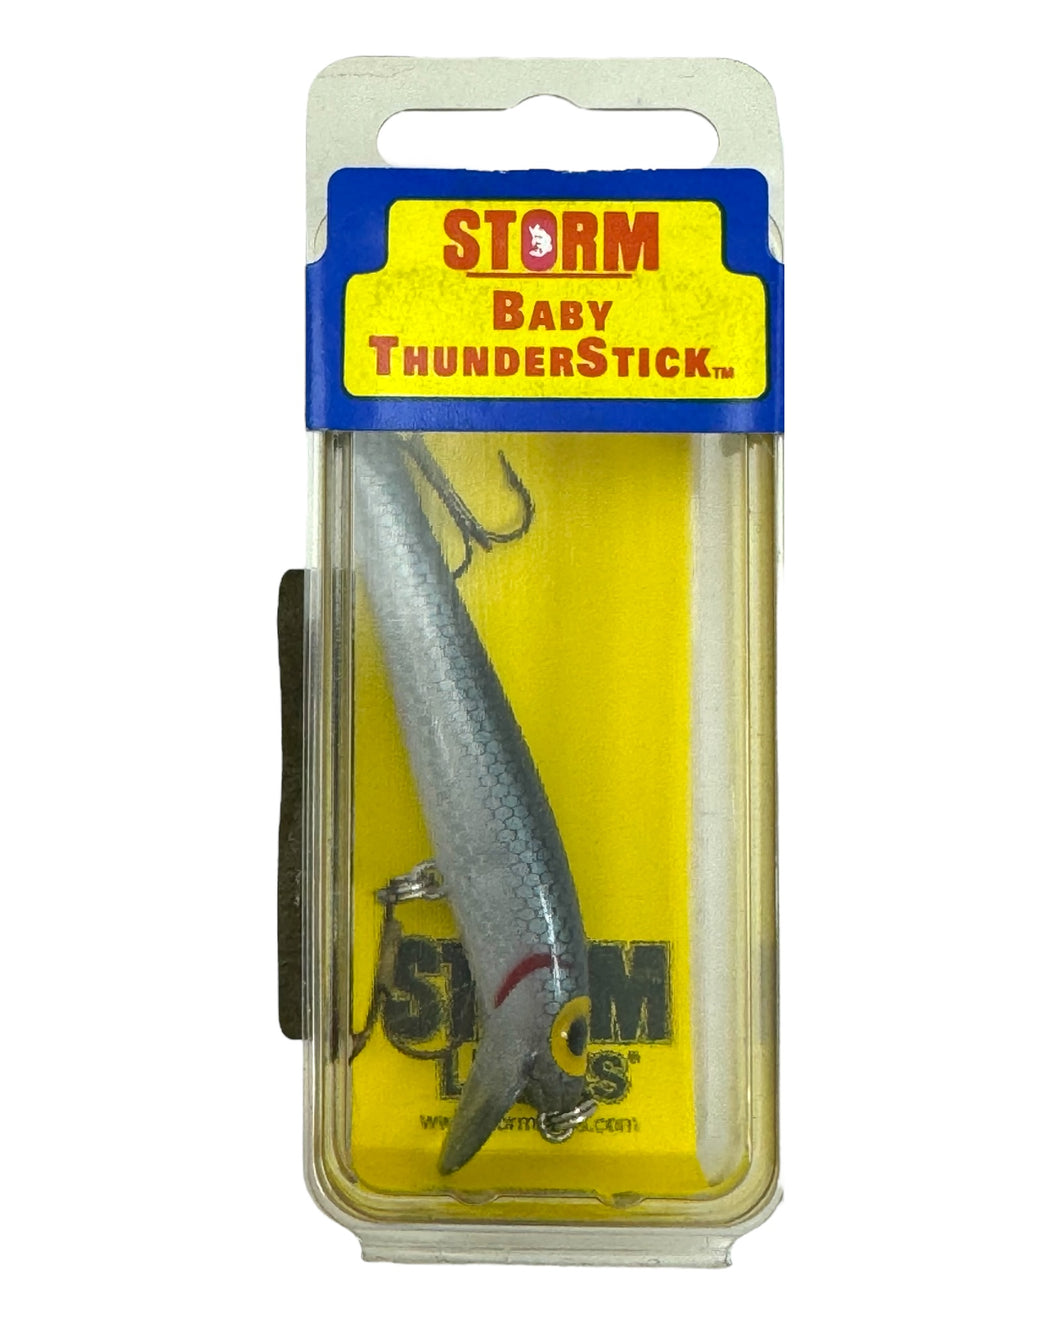 STORM LURES BABY THUNDER STICK  Fishing Lure in BLUE FADE